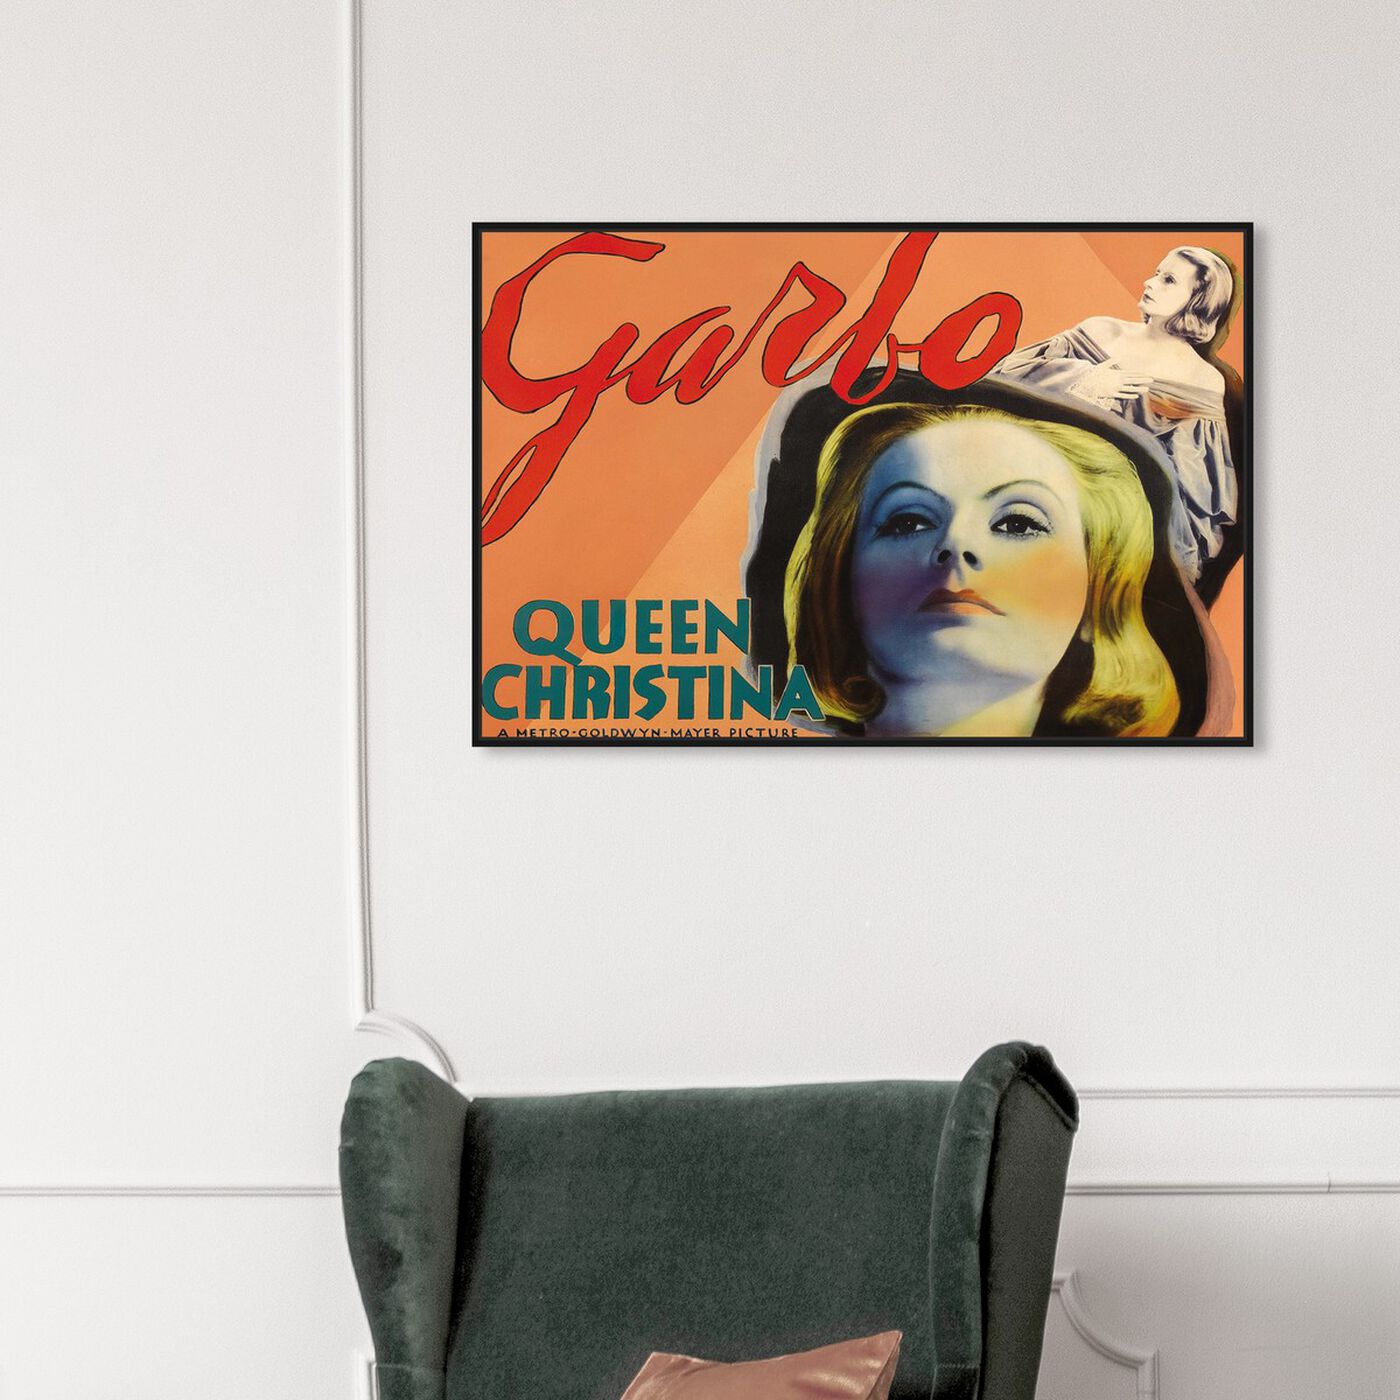 Hanging view of Garbo featuring advertising and posters art.